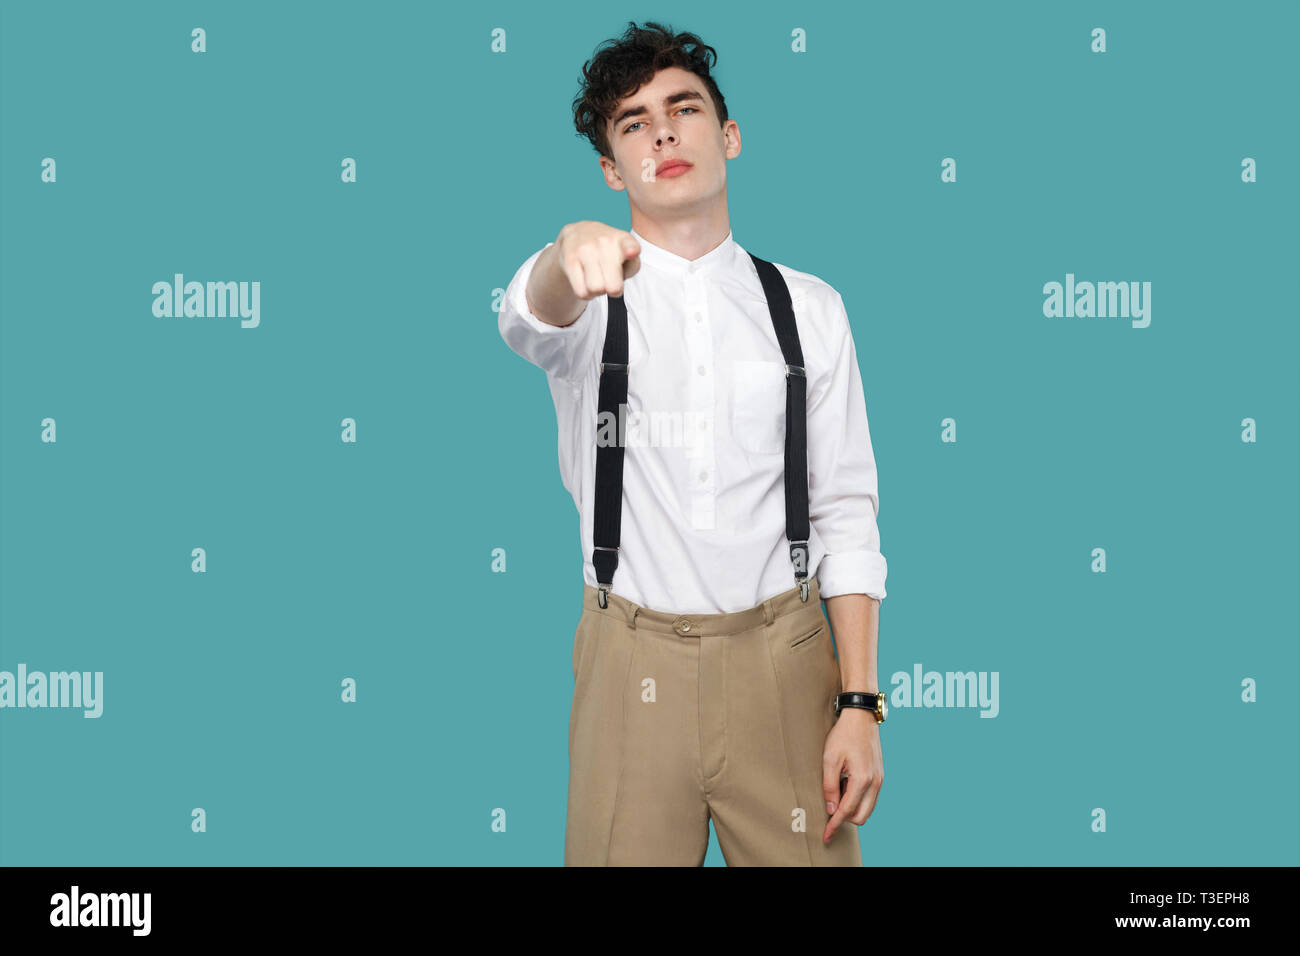 Serious man pointing and looking at camera. Portrait of handsome hipster curly young businessman in classic casual white shirt and suspender standing. Stock Photo